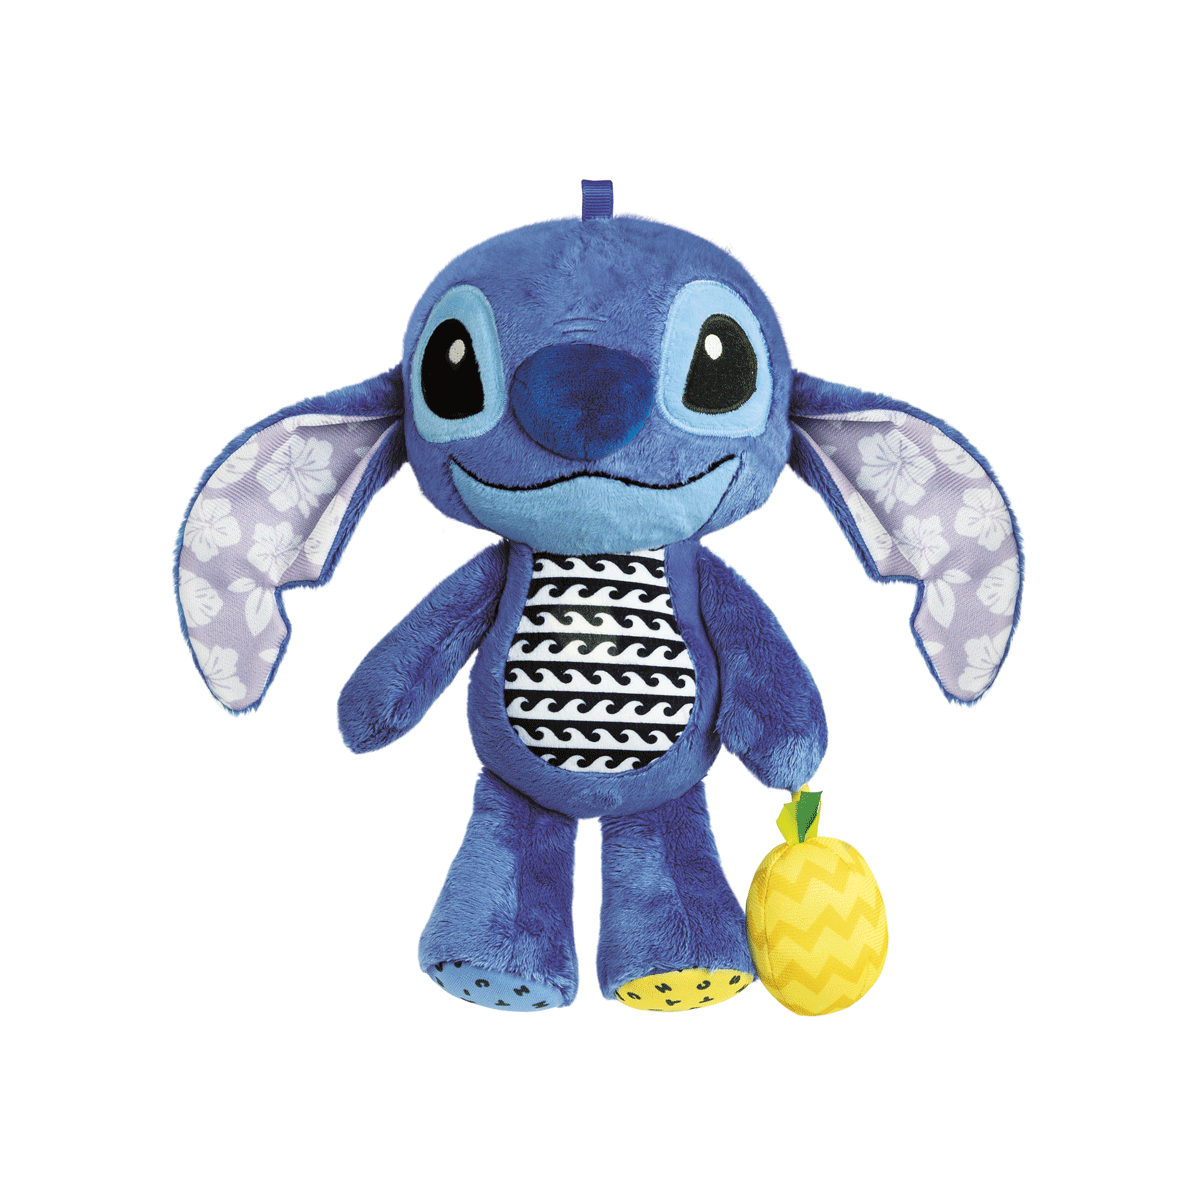 Clementoni - 17918 - stitch first activities - BABY CLEMENTONI